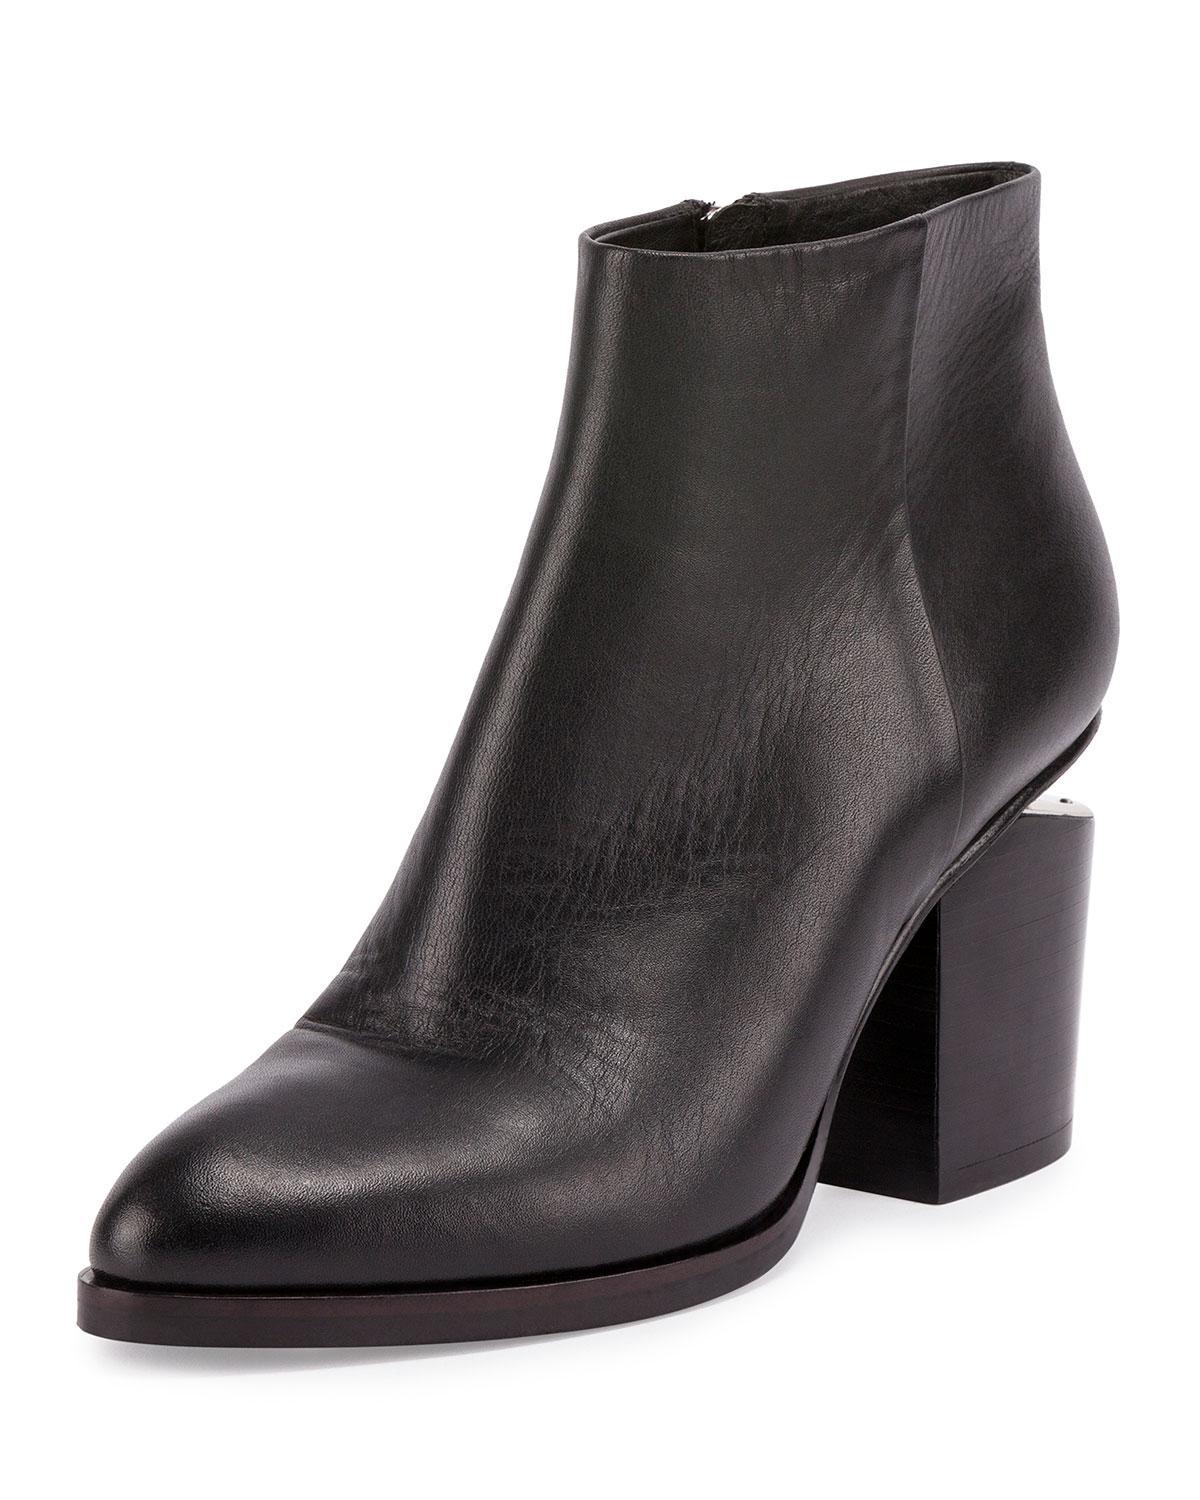 Alexander Wang Gabi Ankle Booties With Rose Gold Hardware in Black 